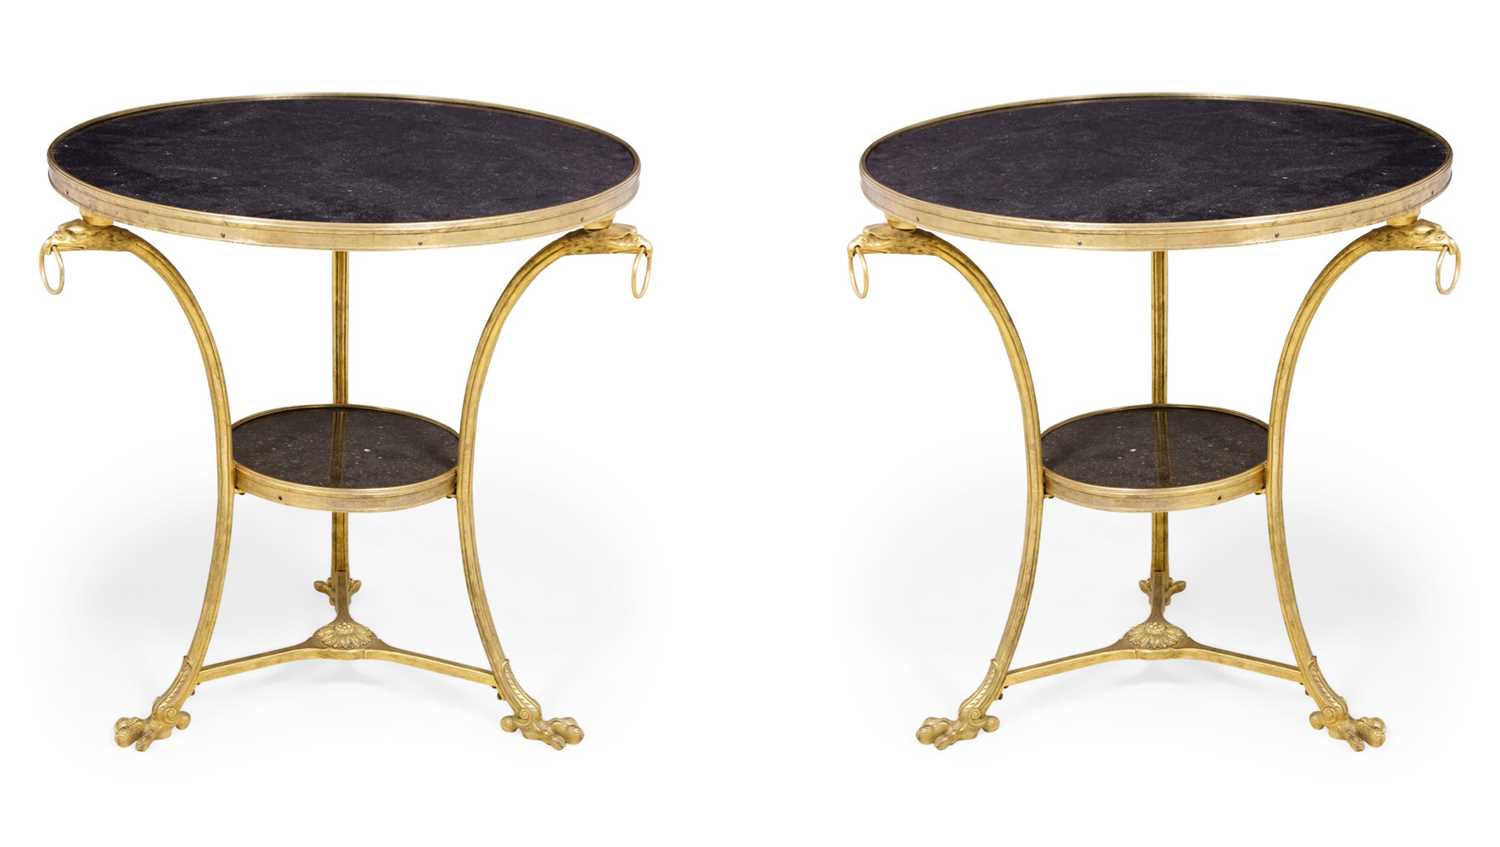 Lot 312 - Pair of Empire Style Gilt Bronze and Marble Gueridons